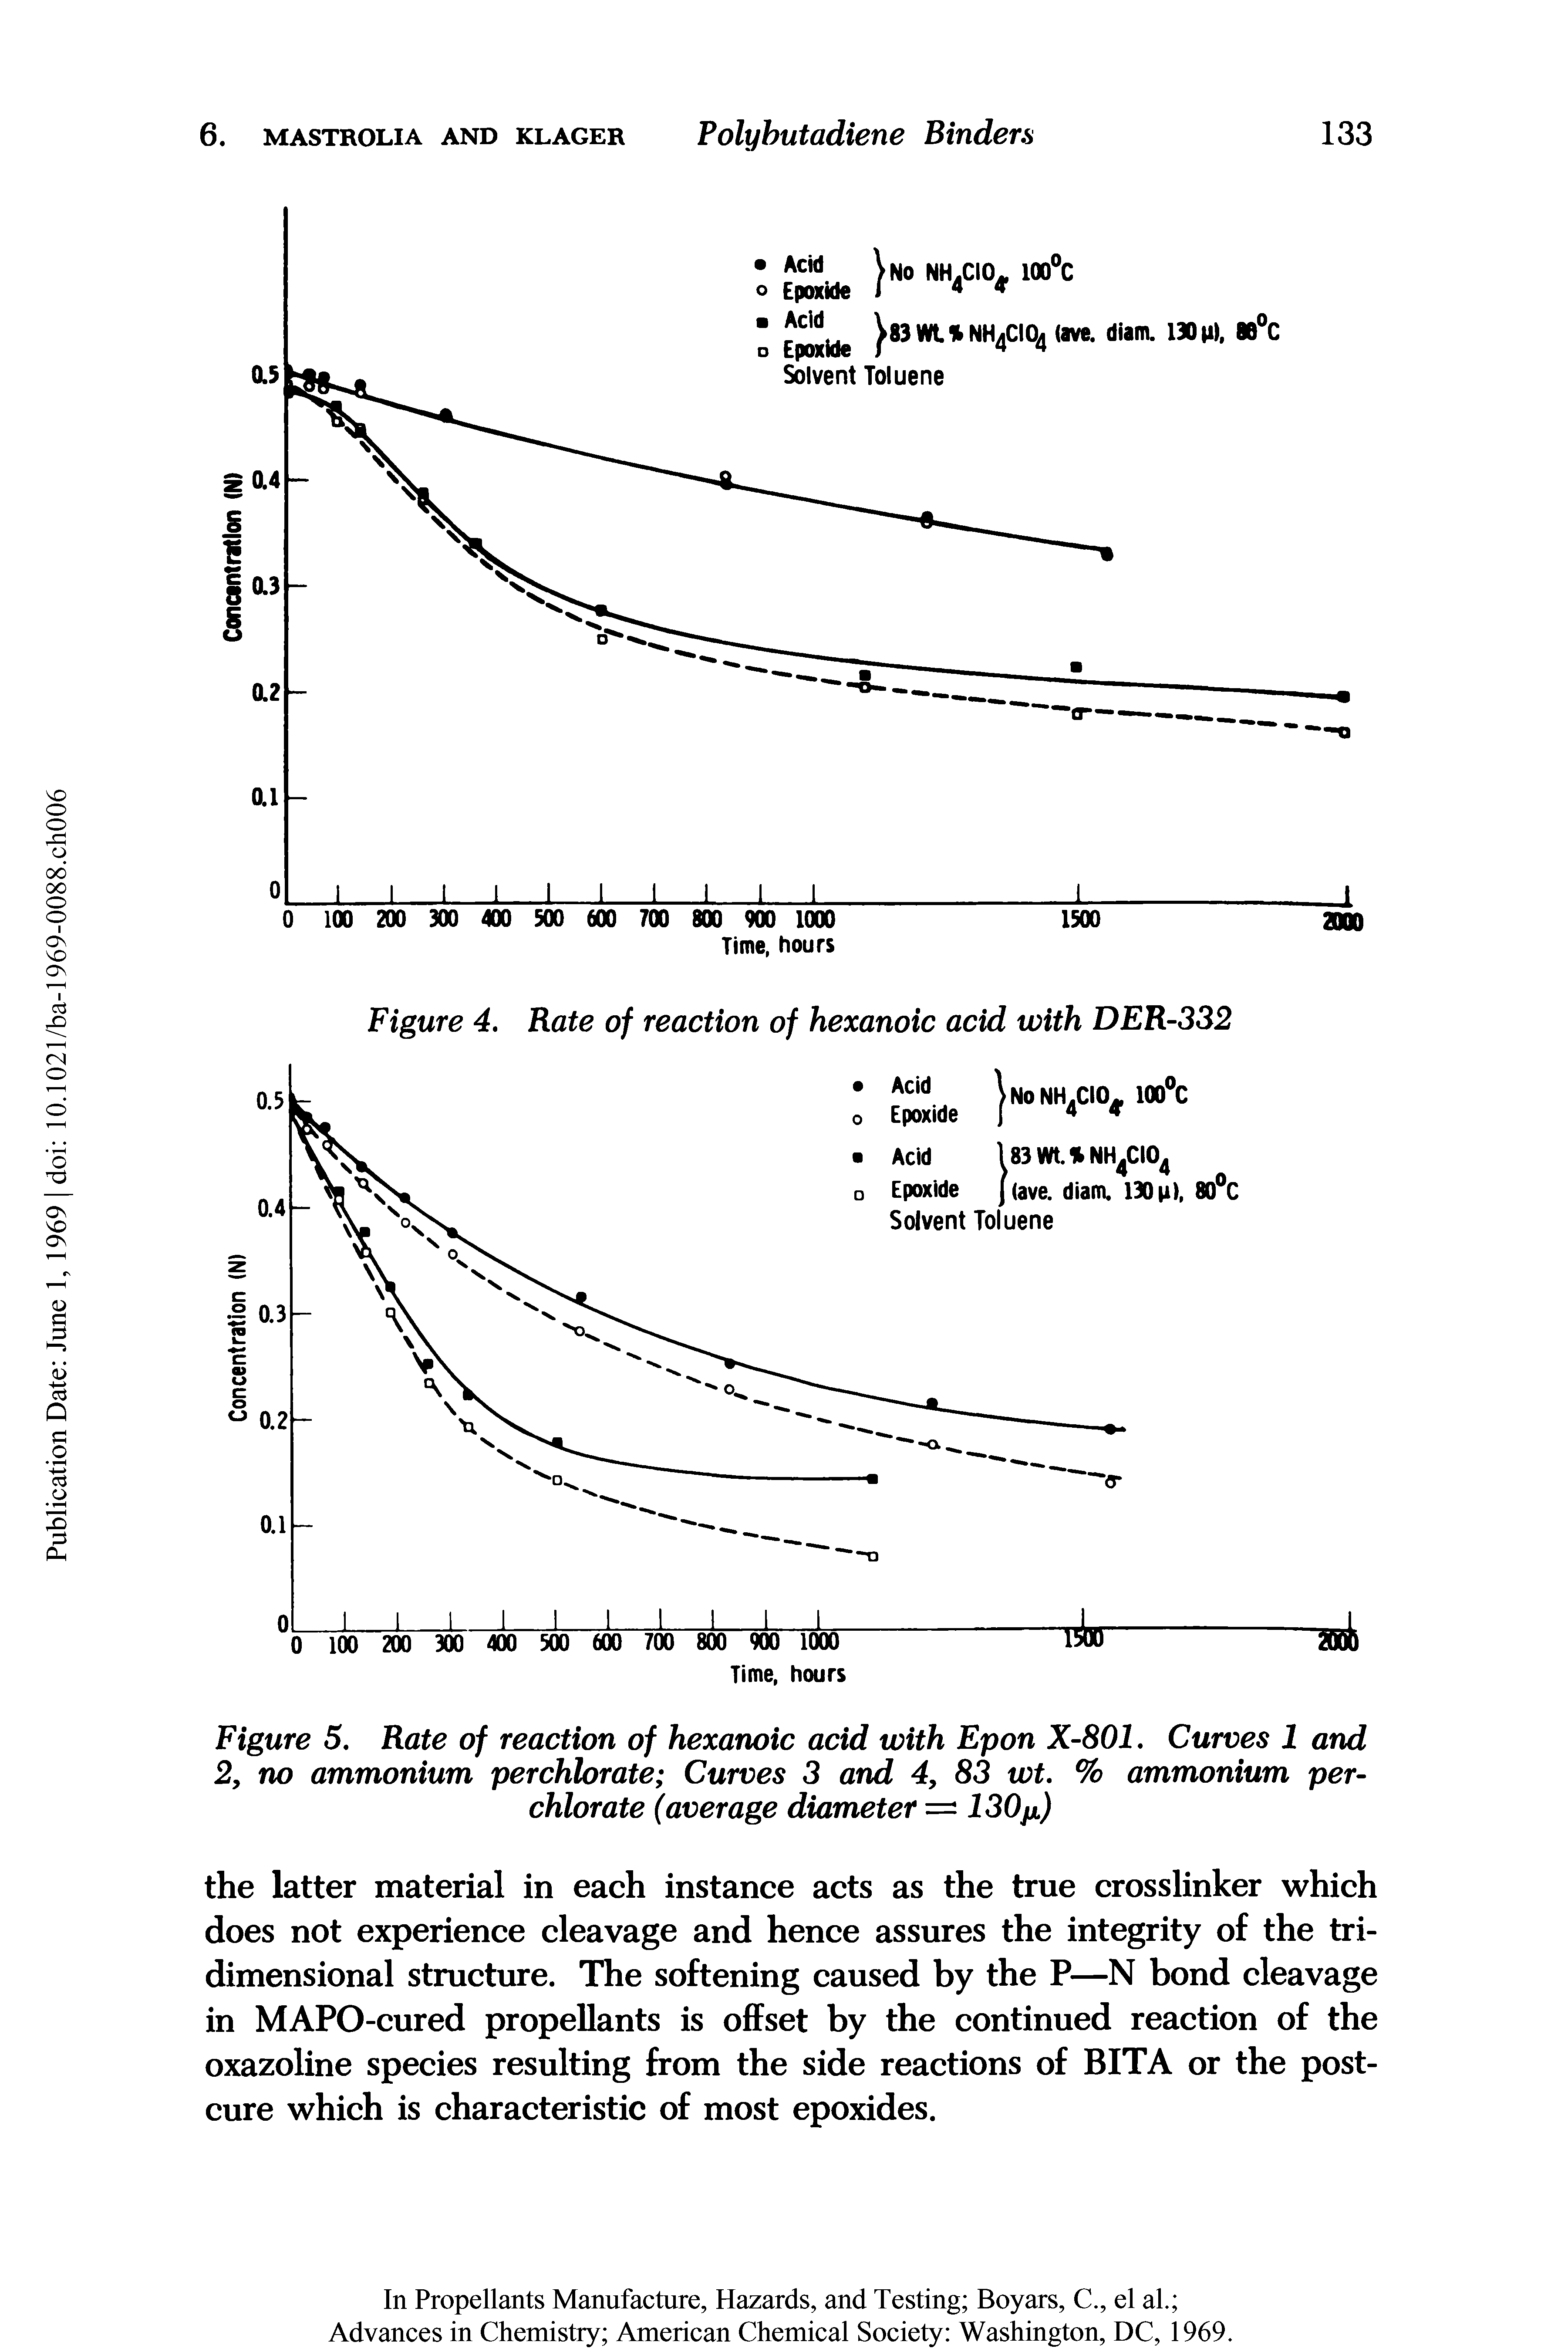 Figure 5. Rate of reaction of hexanoic acid with Epon X-801. Curves 1 and 2, no ammonium perchlorate Curves 3 and 4, 83 wt. % ammonium per-chlorate (average diameter — 130jjl)...